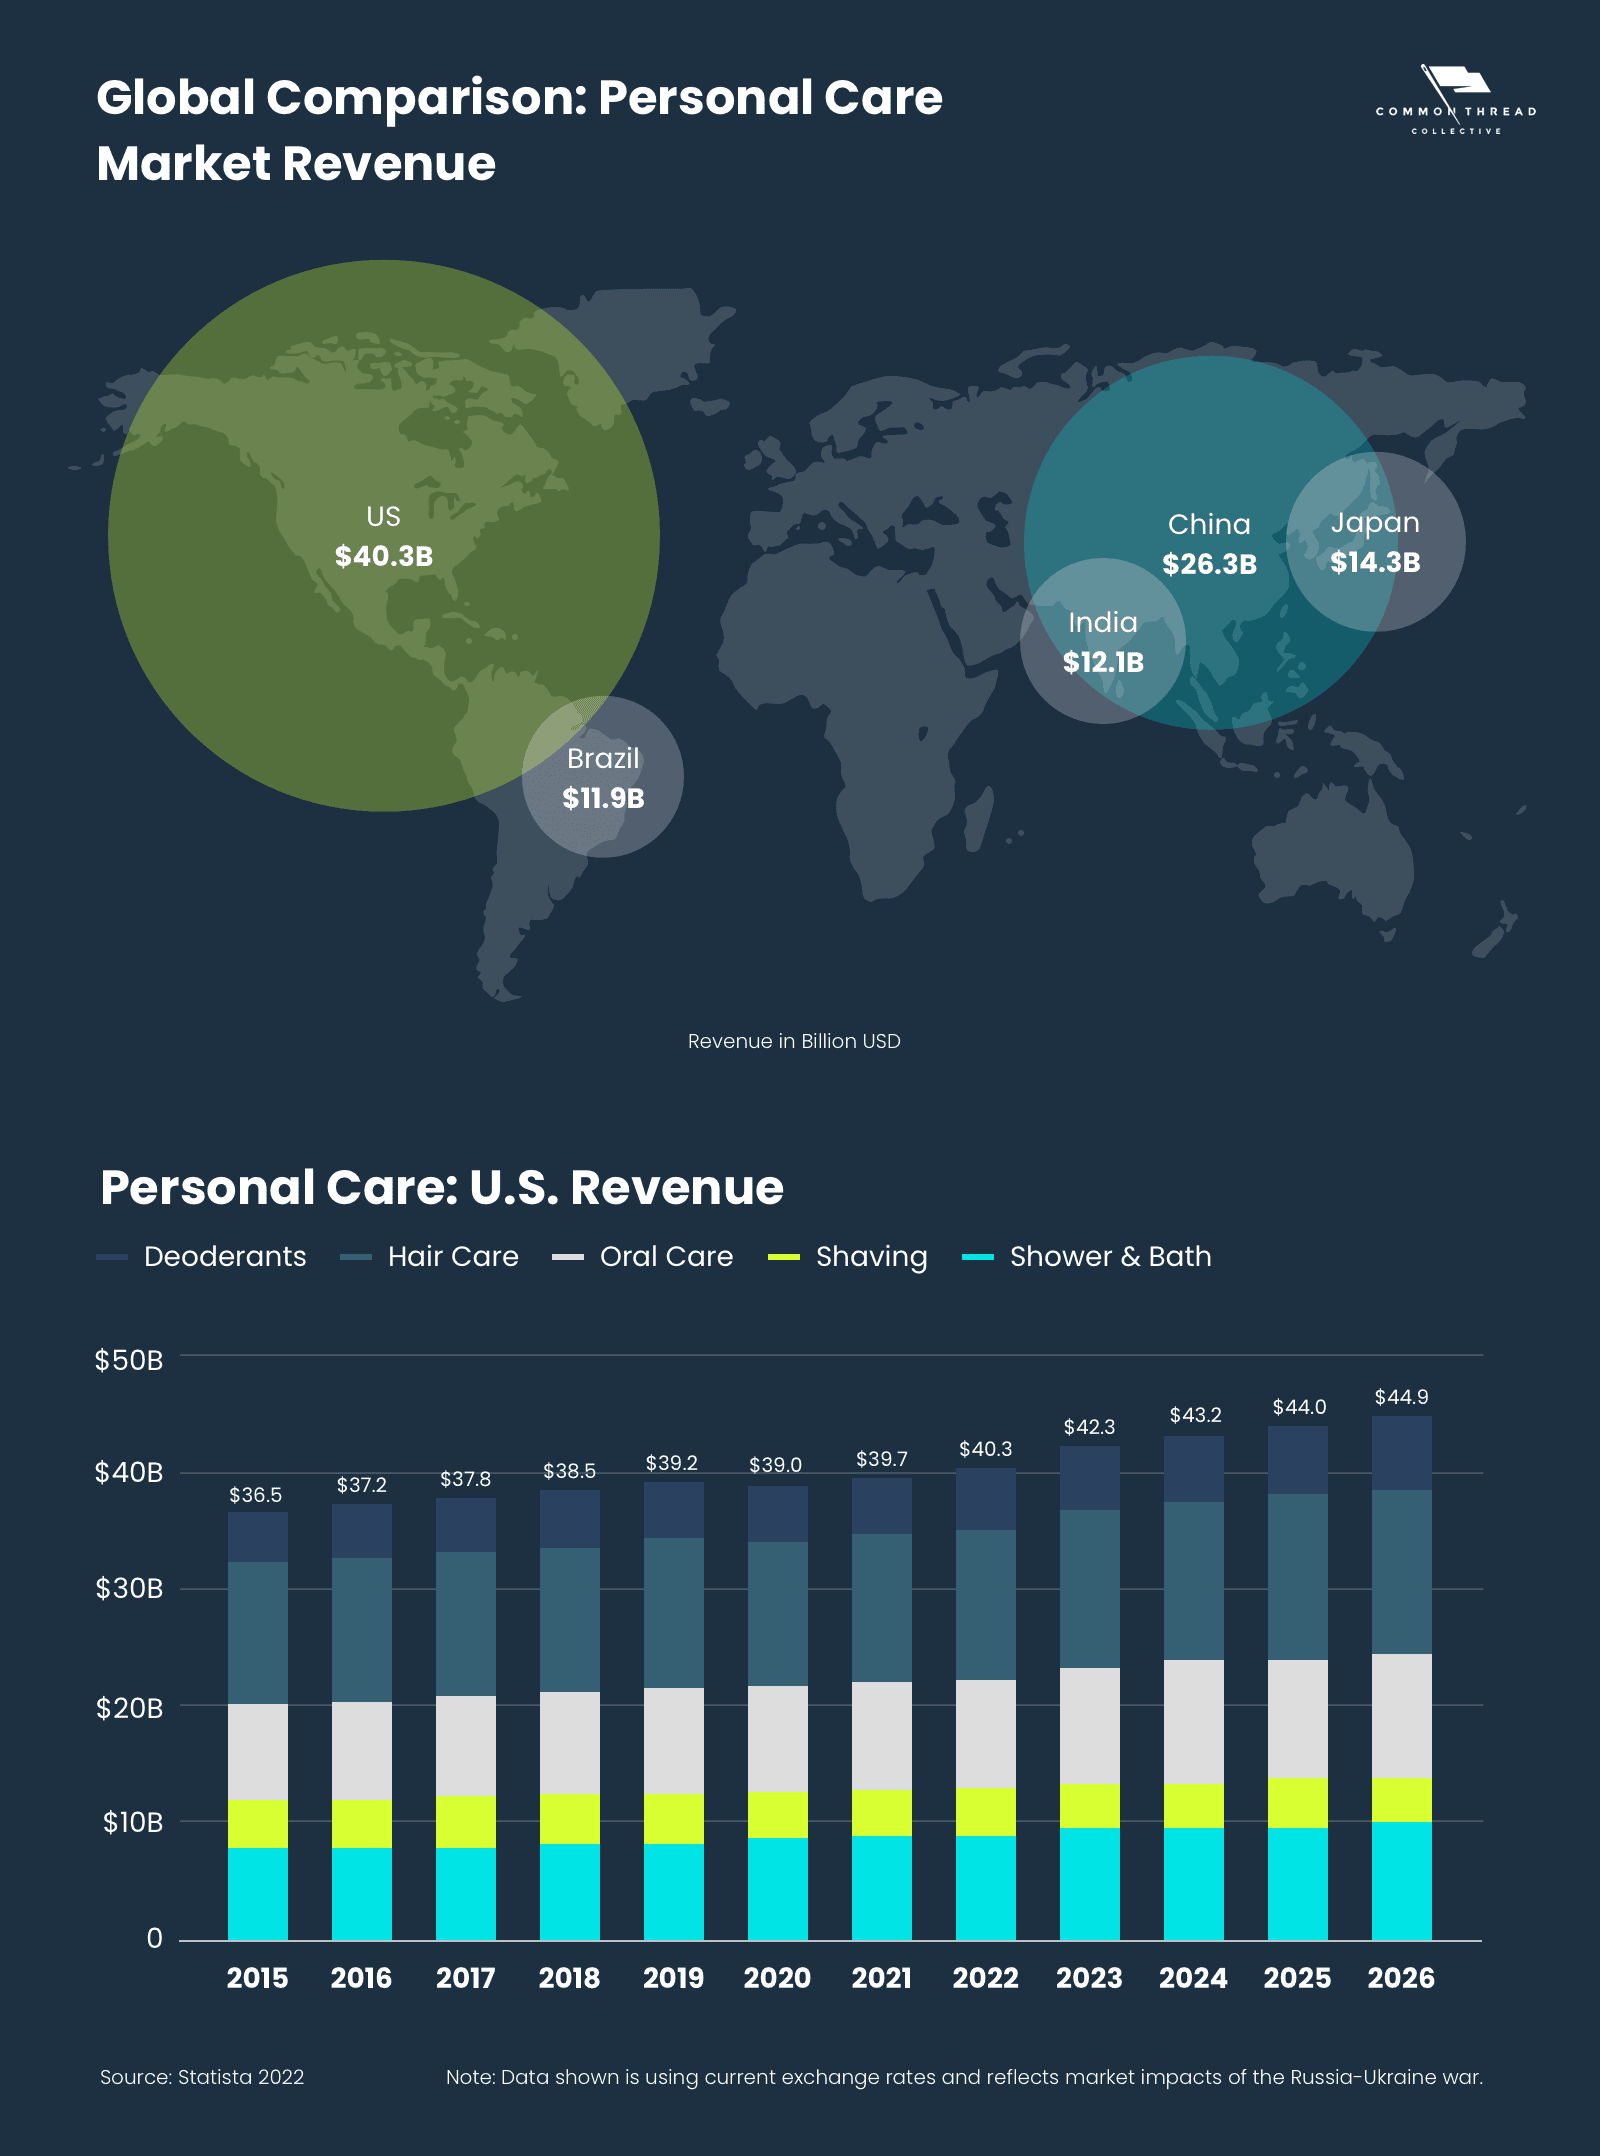 Global Comparison and Personal Care Market Revenue in the US